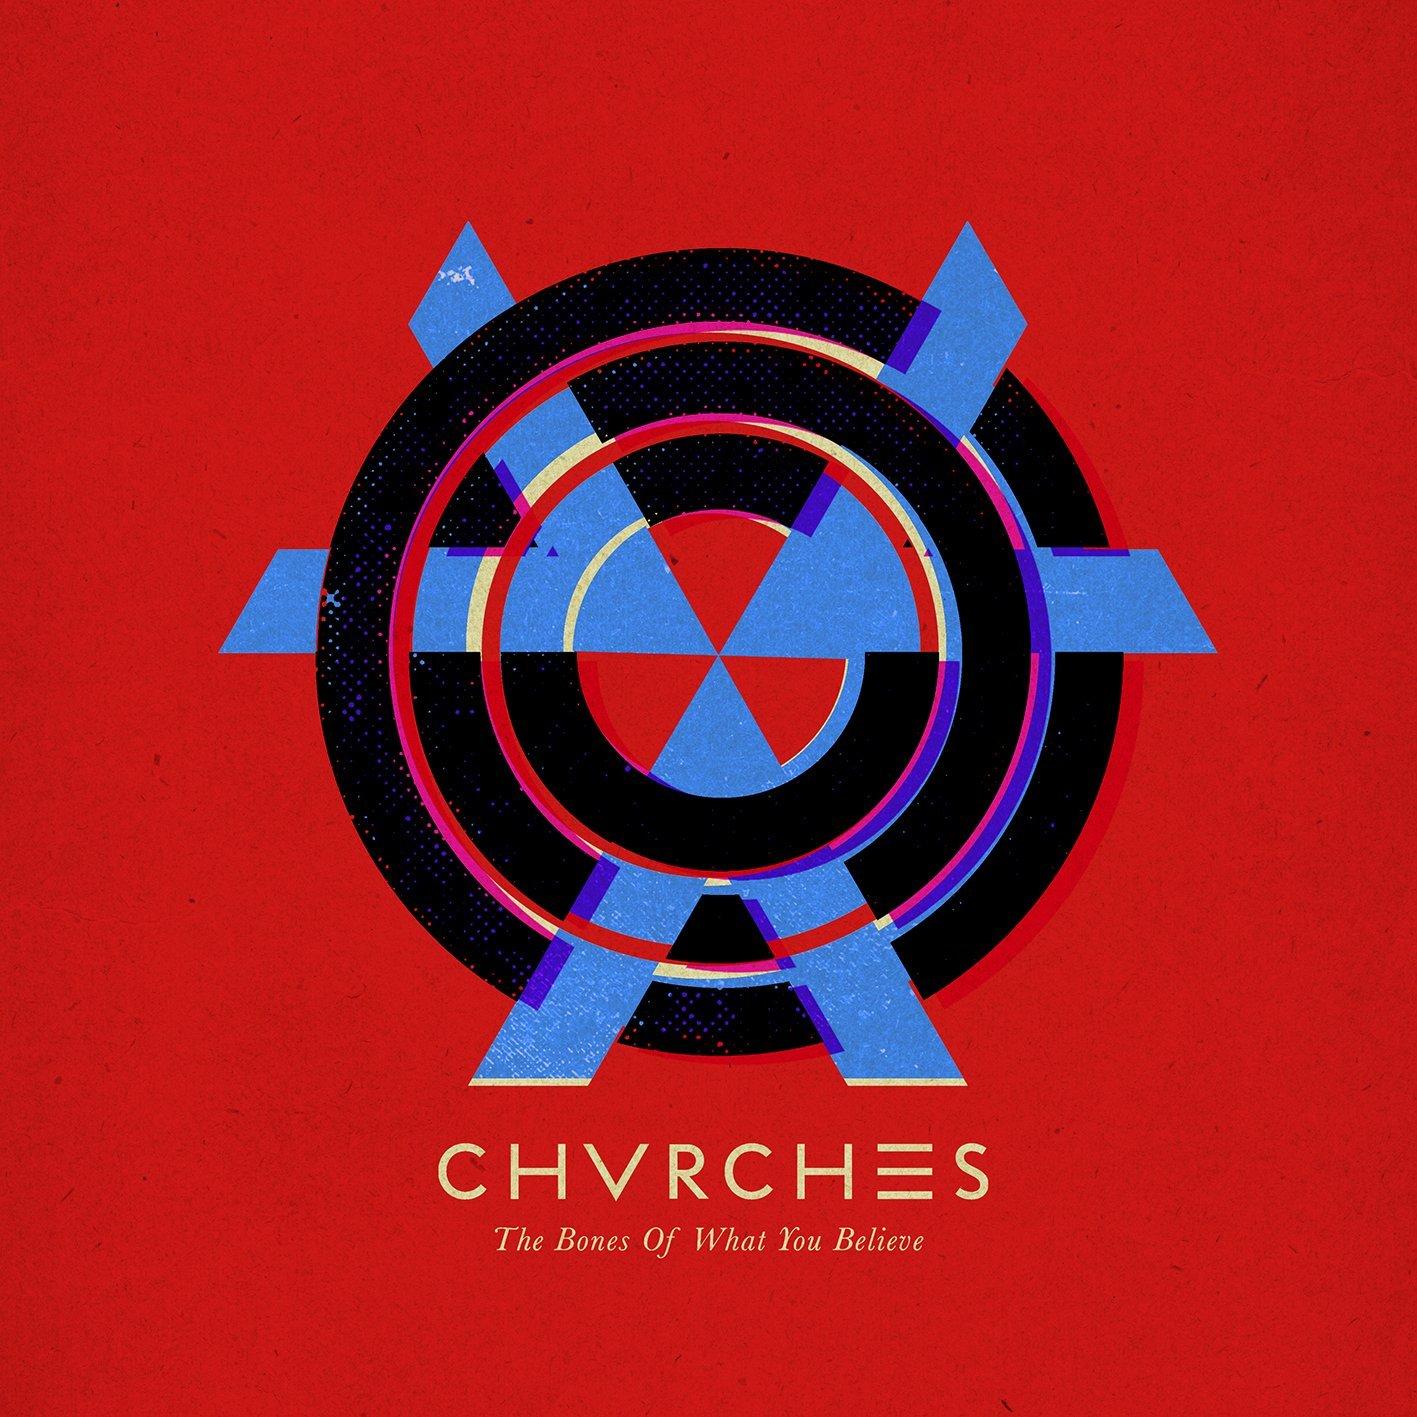 Chvrches’ The Bones of What You Believe received immediate critical and commercial success after its 2013 release.